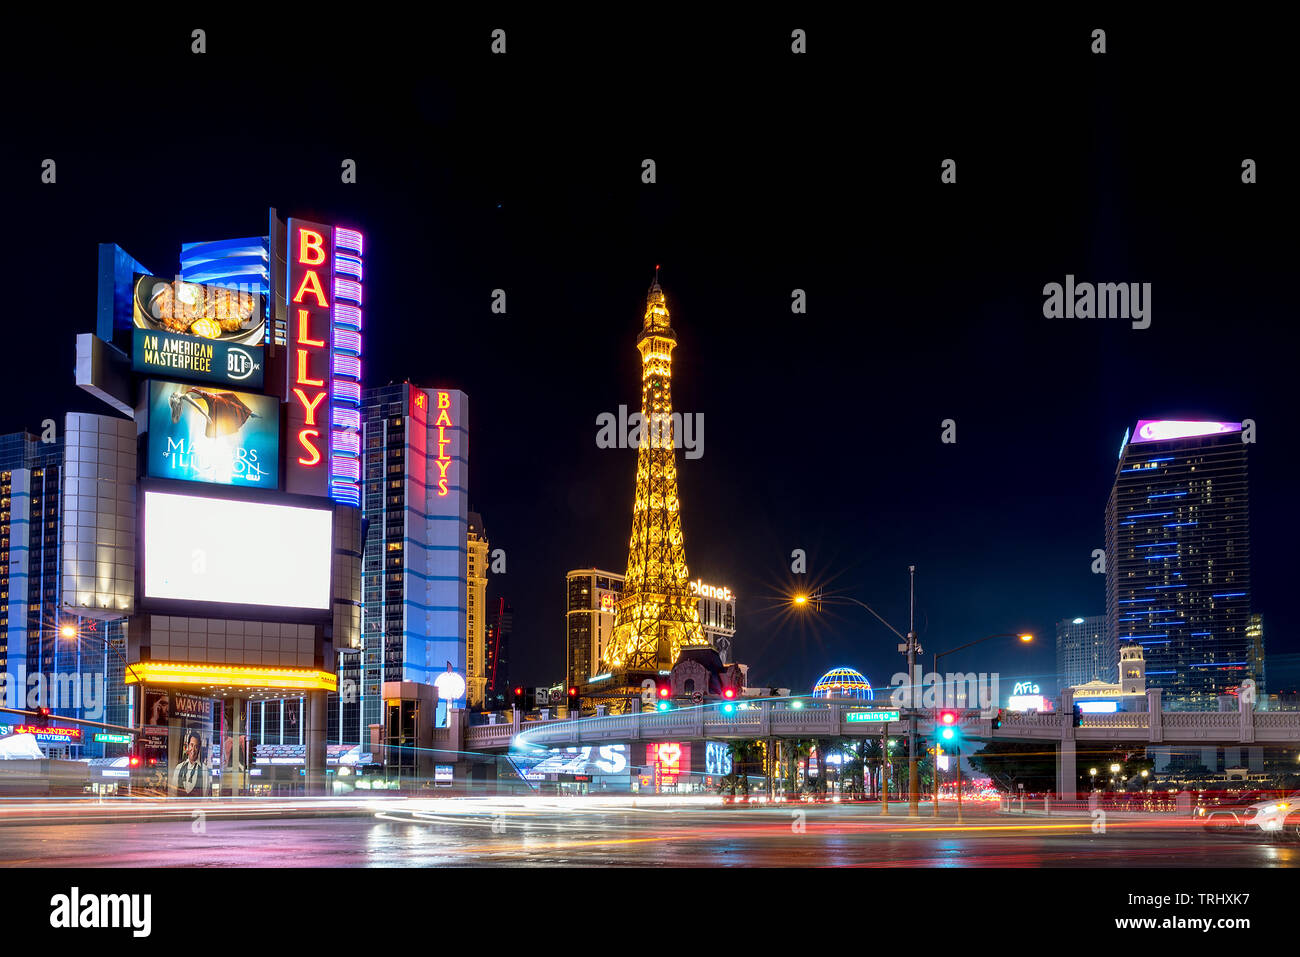 LAS VEGAS, NEVADA - FEB 1: Night scene at the strip in Las Vegas, Nevada on February 1, 2018. The city is famous for its many indulgences and vices, t Stock Photo